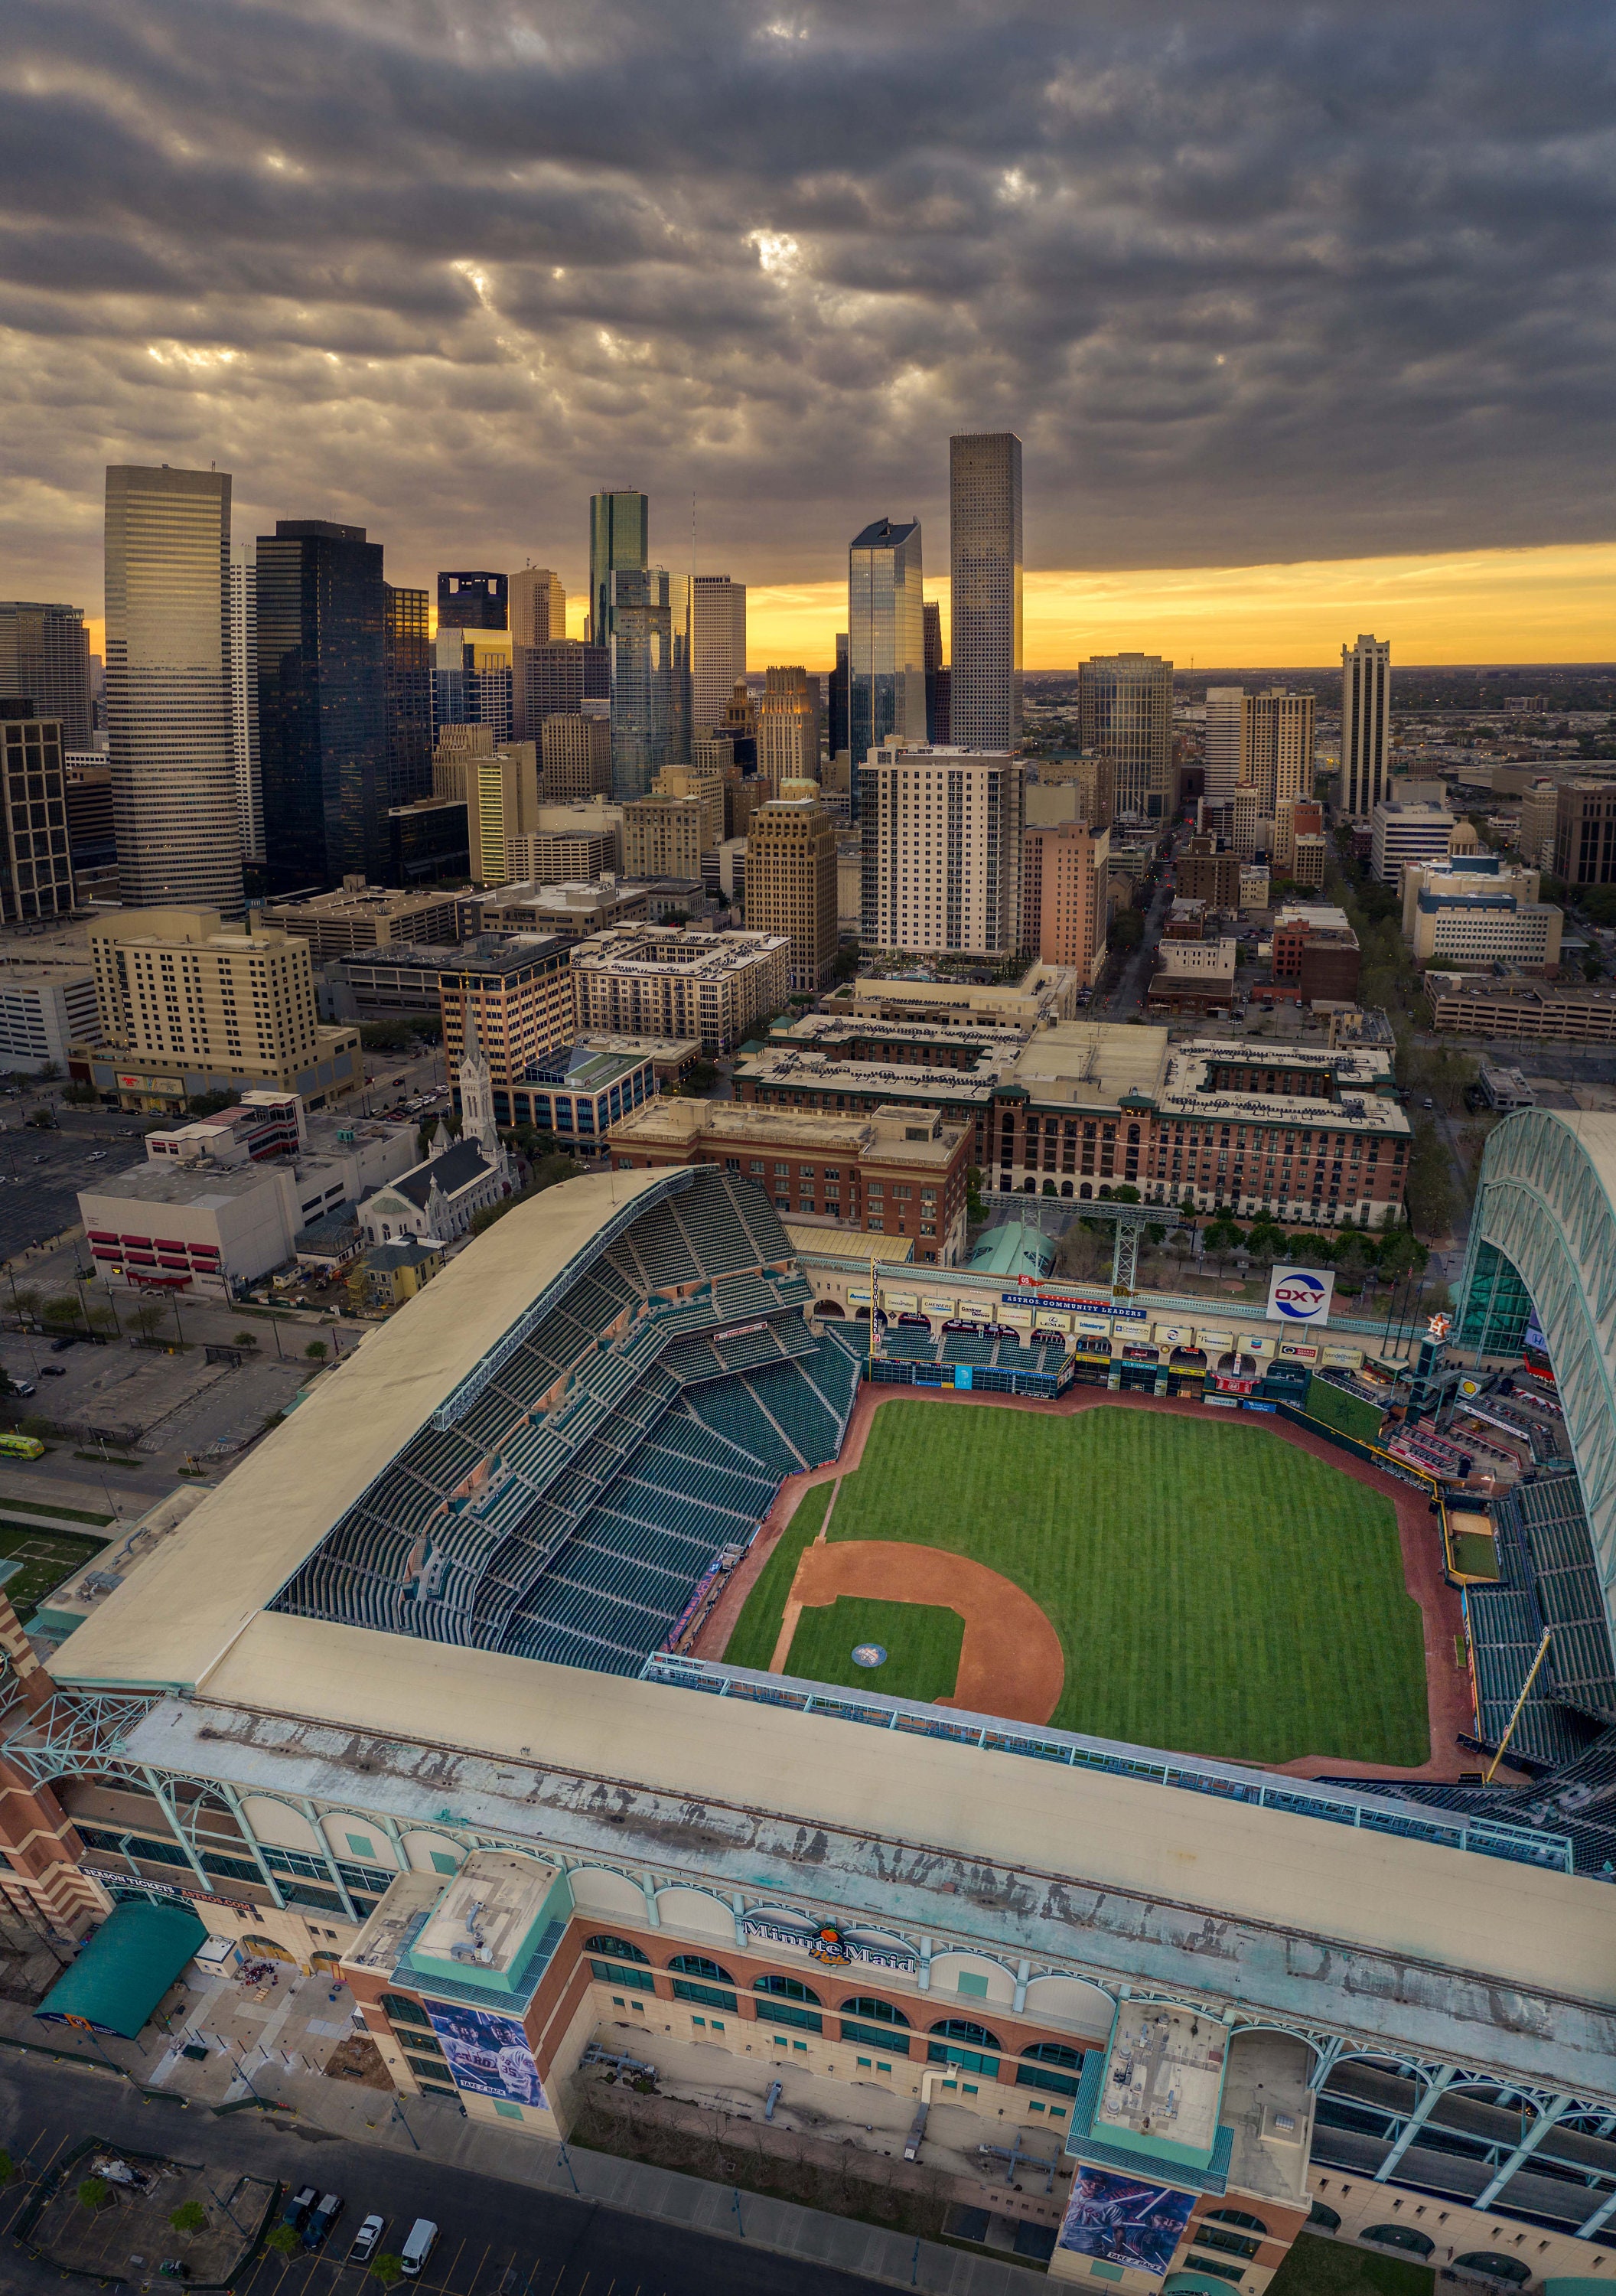 Minute Maid Park added a new photo. - Minute Maid Park